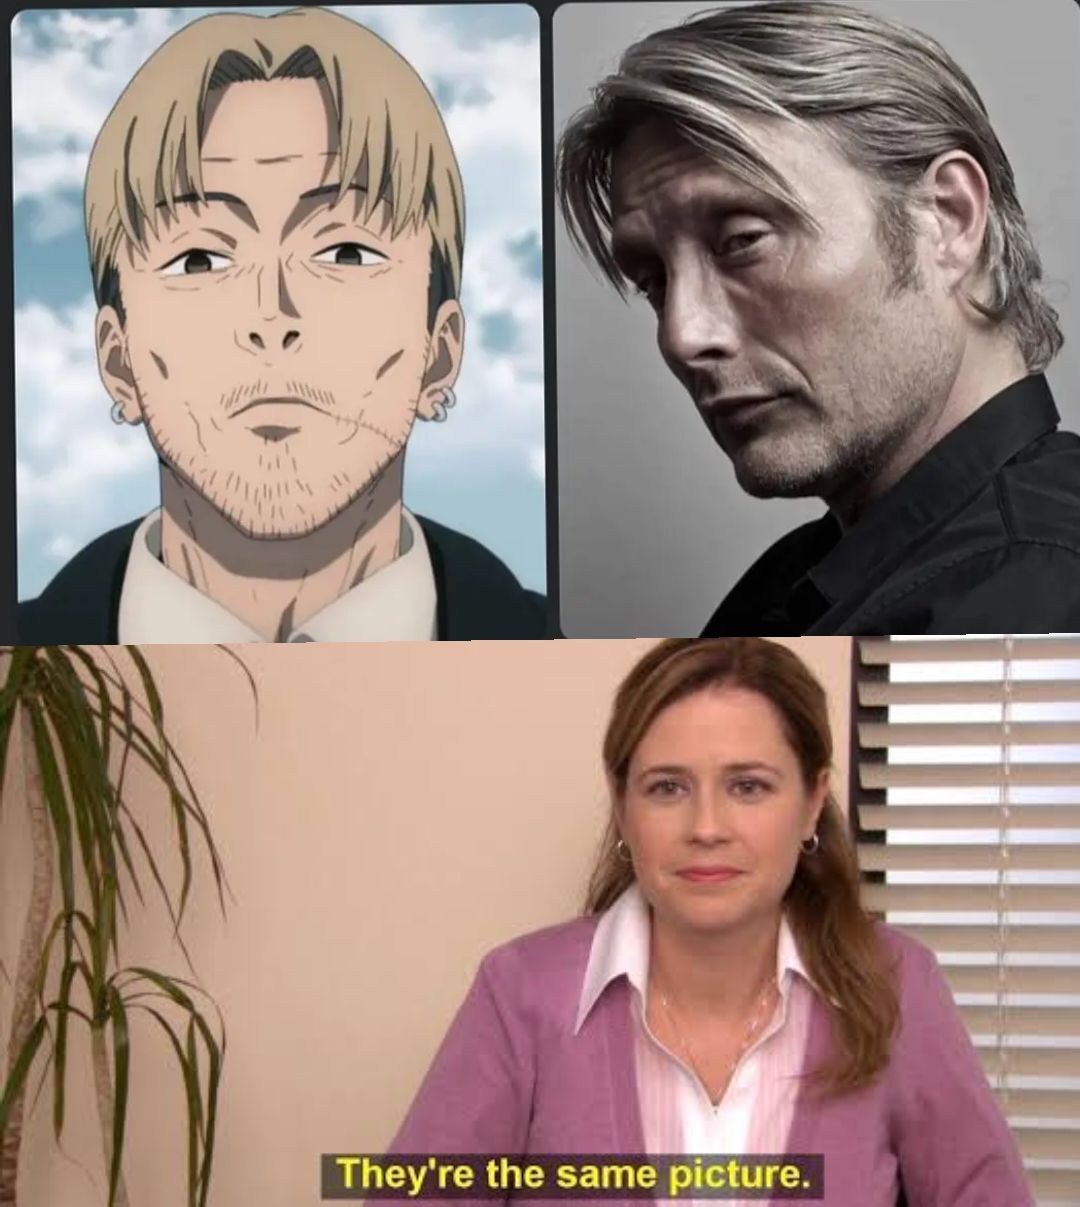 Mads Mikkelsen as kishibe is pure perfection